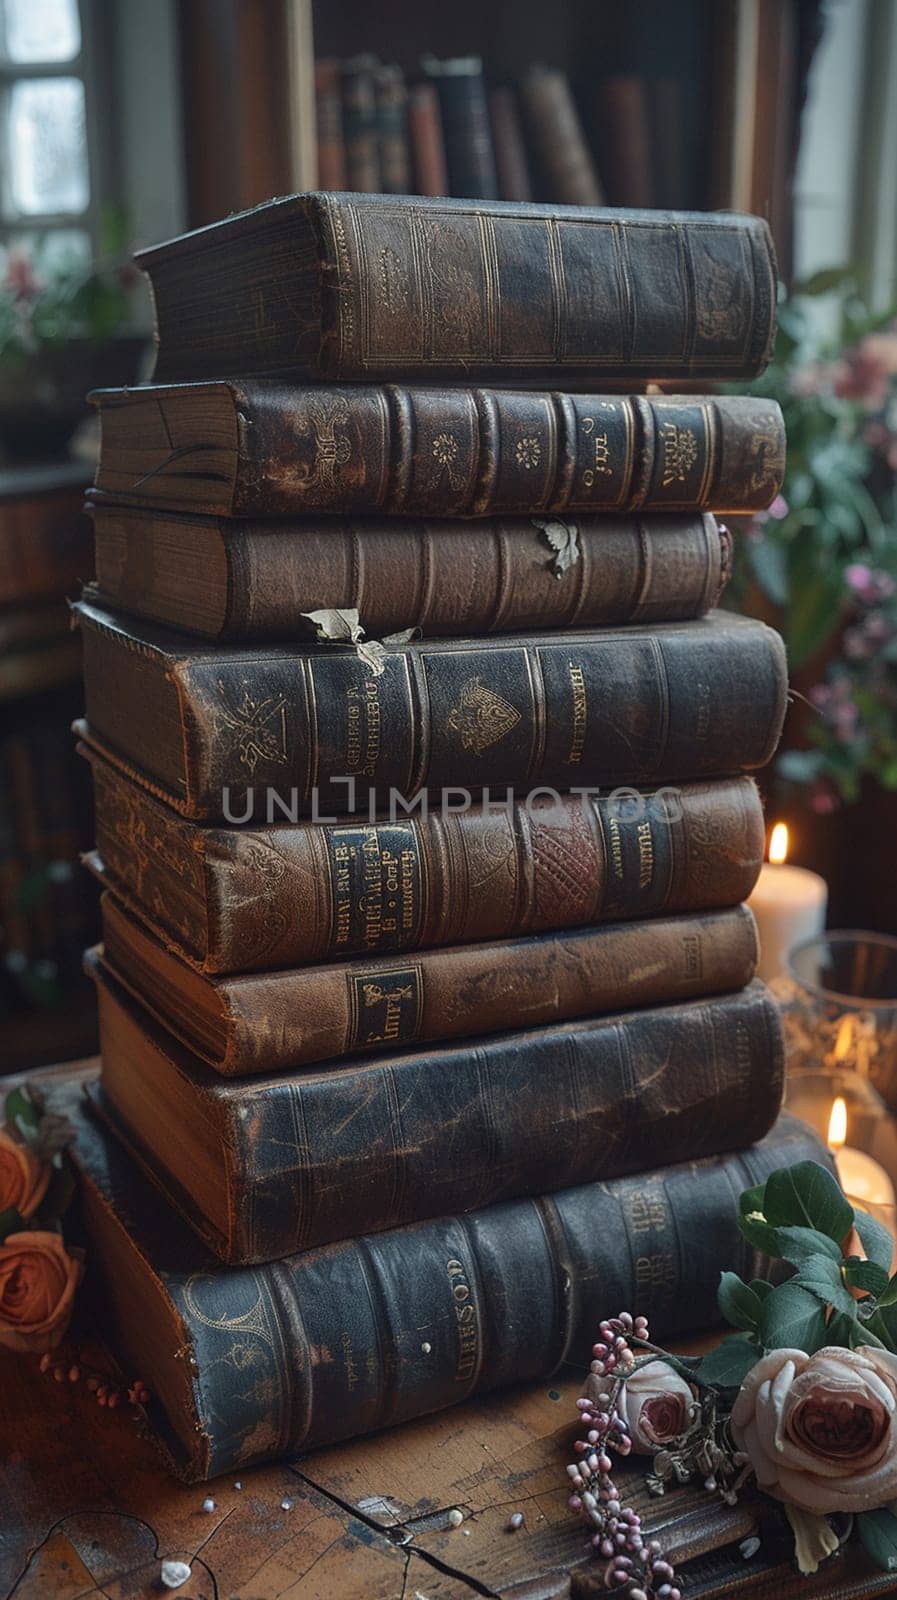 Leather-Bound Books and Soft Candlelight, Historical novels layered and binding-blurred, evoking the romanticism of past narratives.